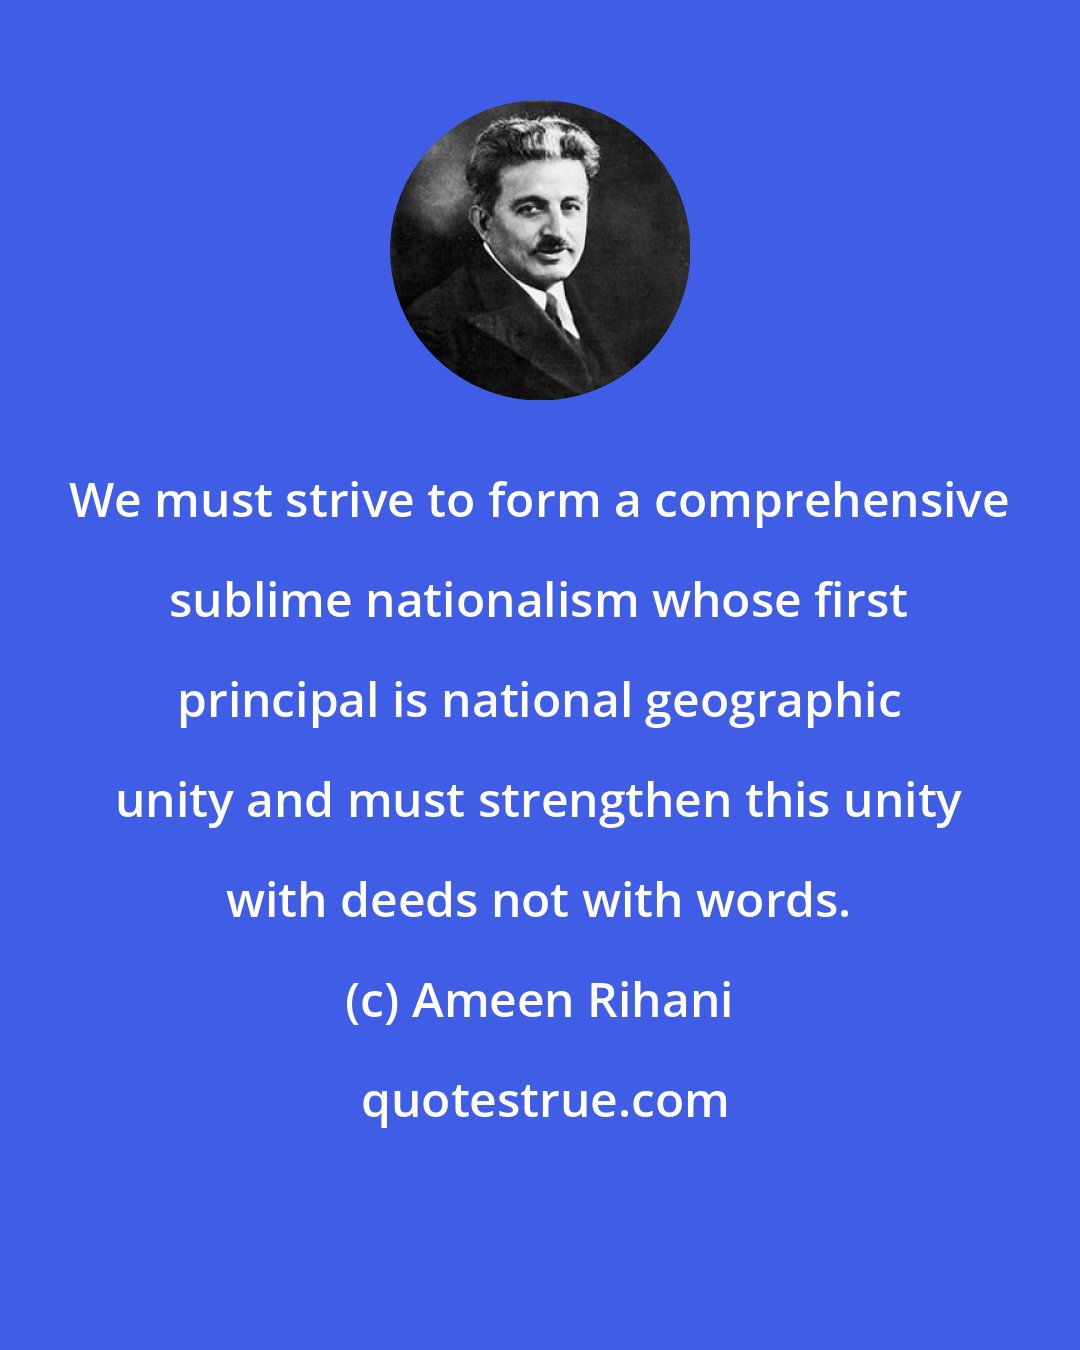 Ameen Rihani: We must strive to form a comprehensive sublime nationalism whose first principal is national geographic unity and must strengthen this unity with deeds not with words.